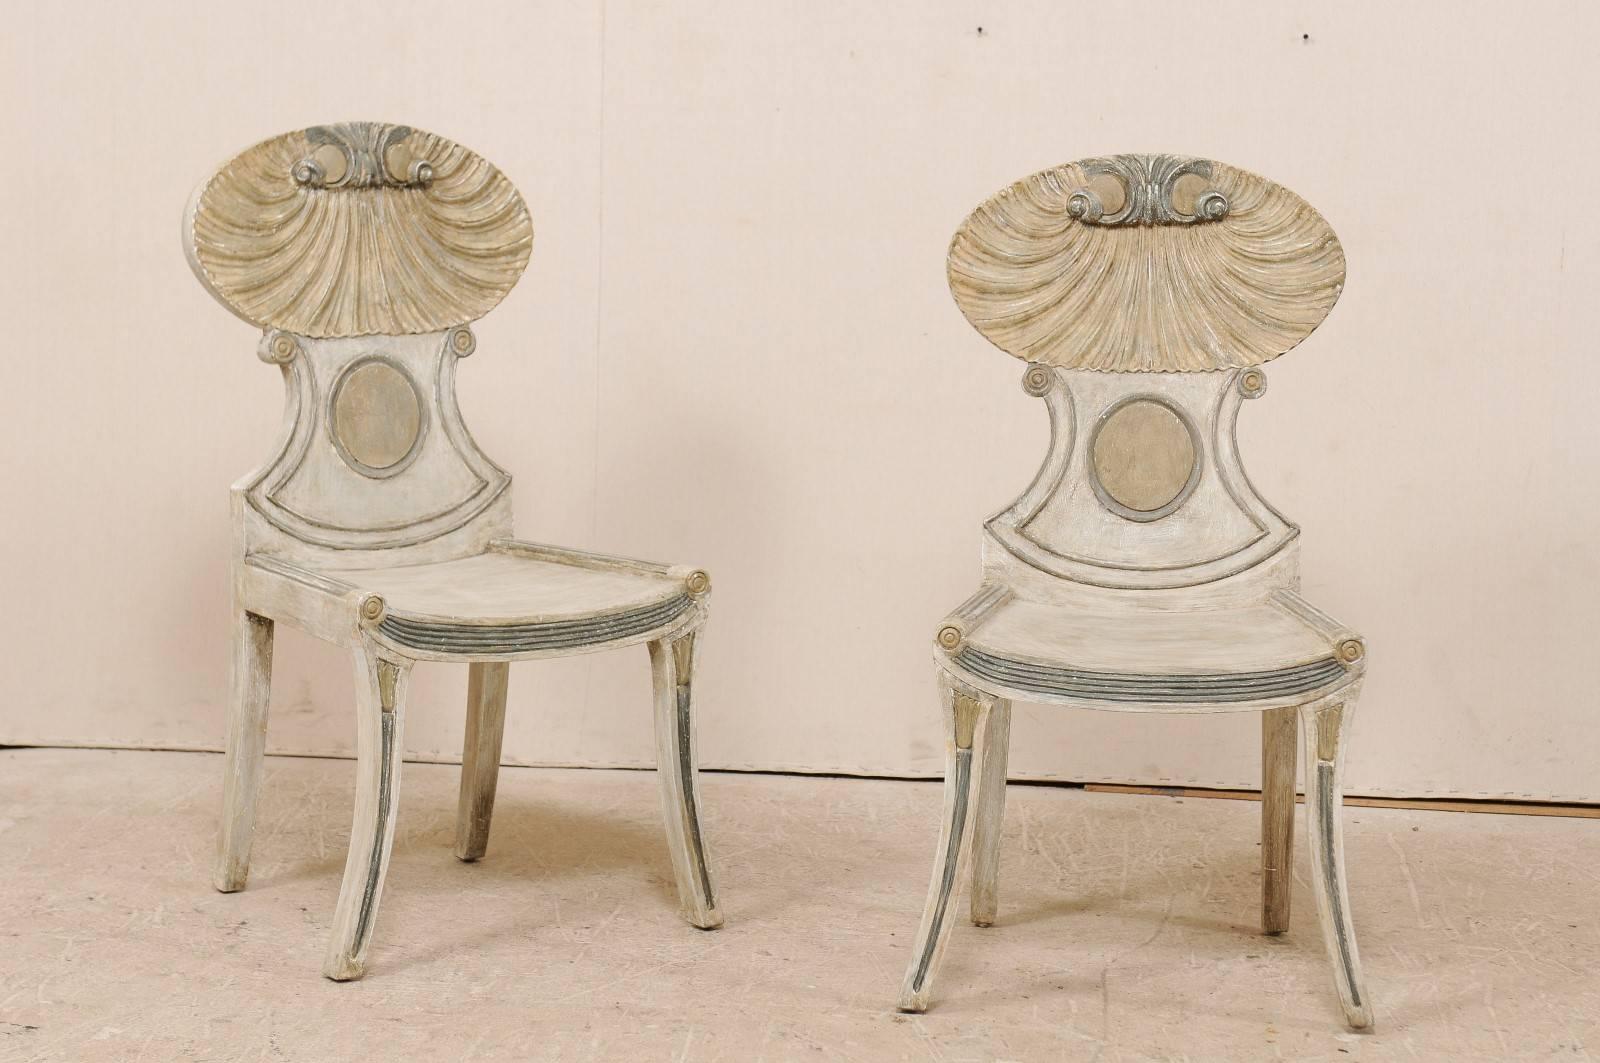 A pair of vintage American carved and painted wood grotto chairs. This pair of grotto side chairs feature a shell motif carved at their upper backs, typical for this Italian style chair. The chair backs are quite curvy and fluid with scroll work at